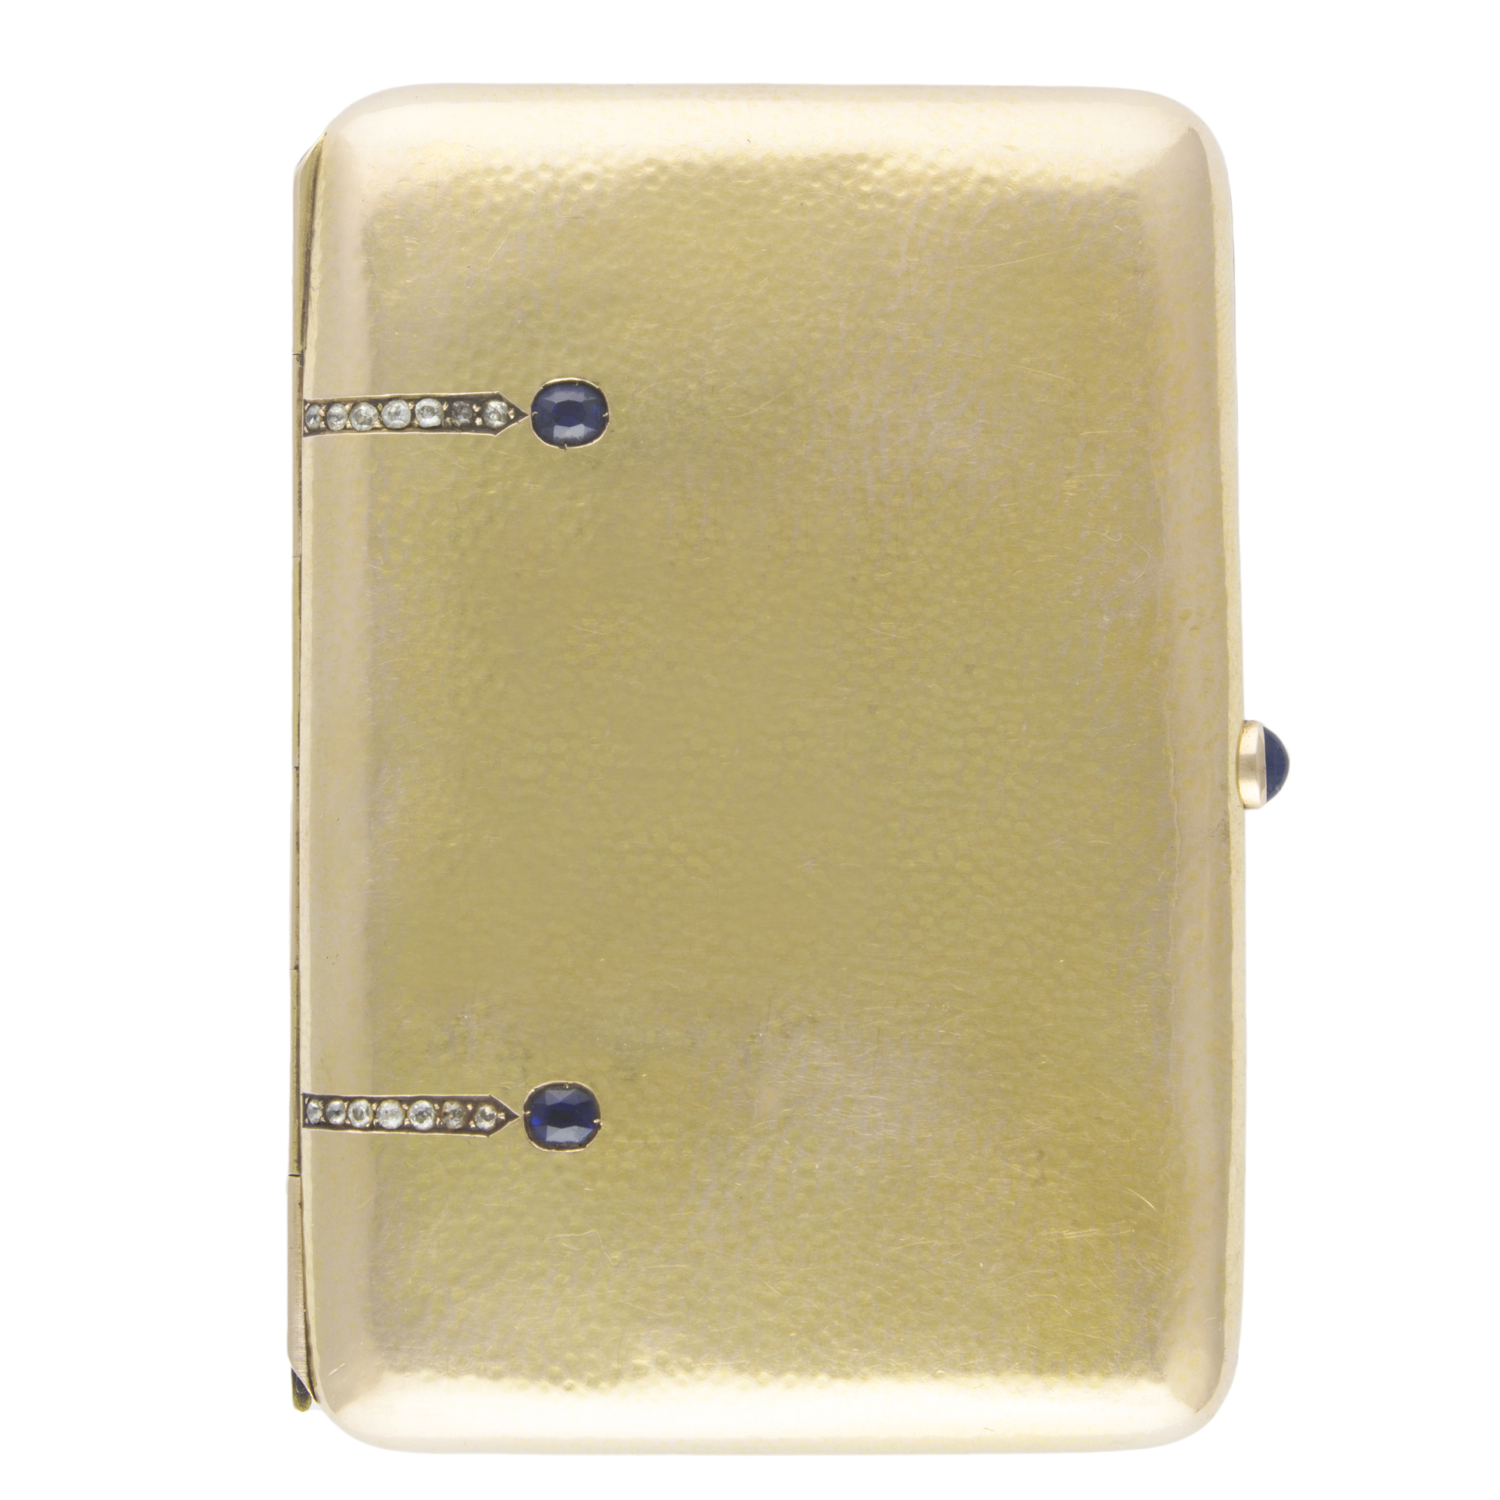 A 14K SOLID GOLD, DIAMOND & SAPPHIRE CIGARETTE CASE CIRCA 1930s Case: Approx. 65mm by 95mm,